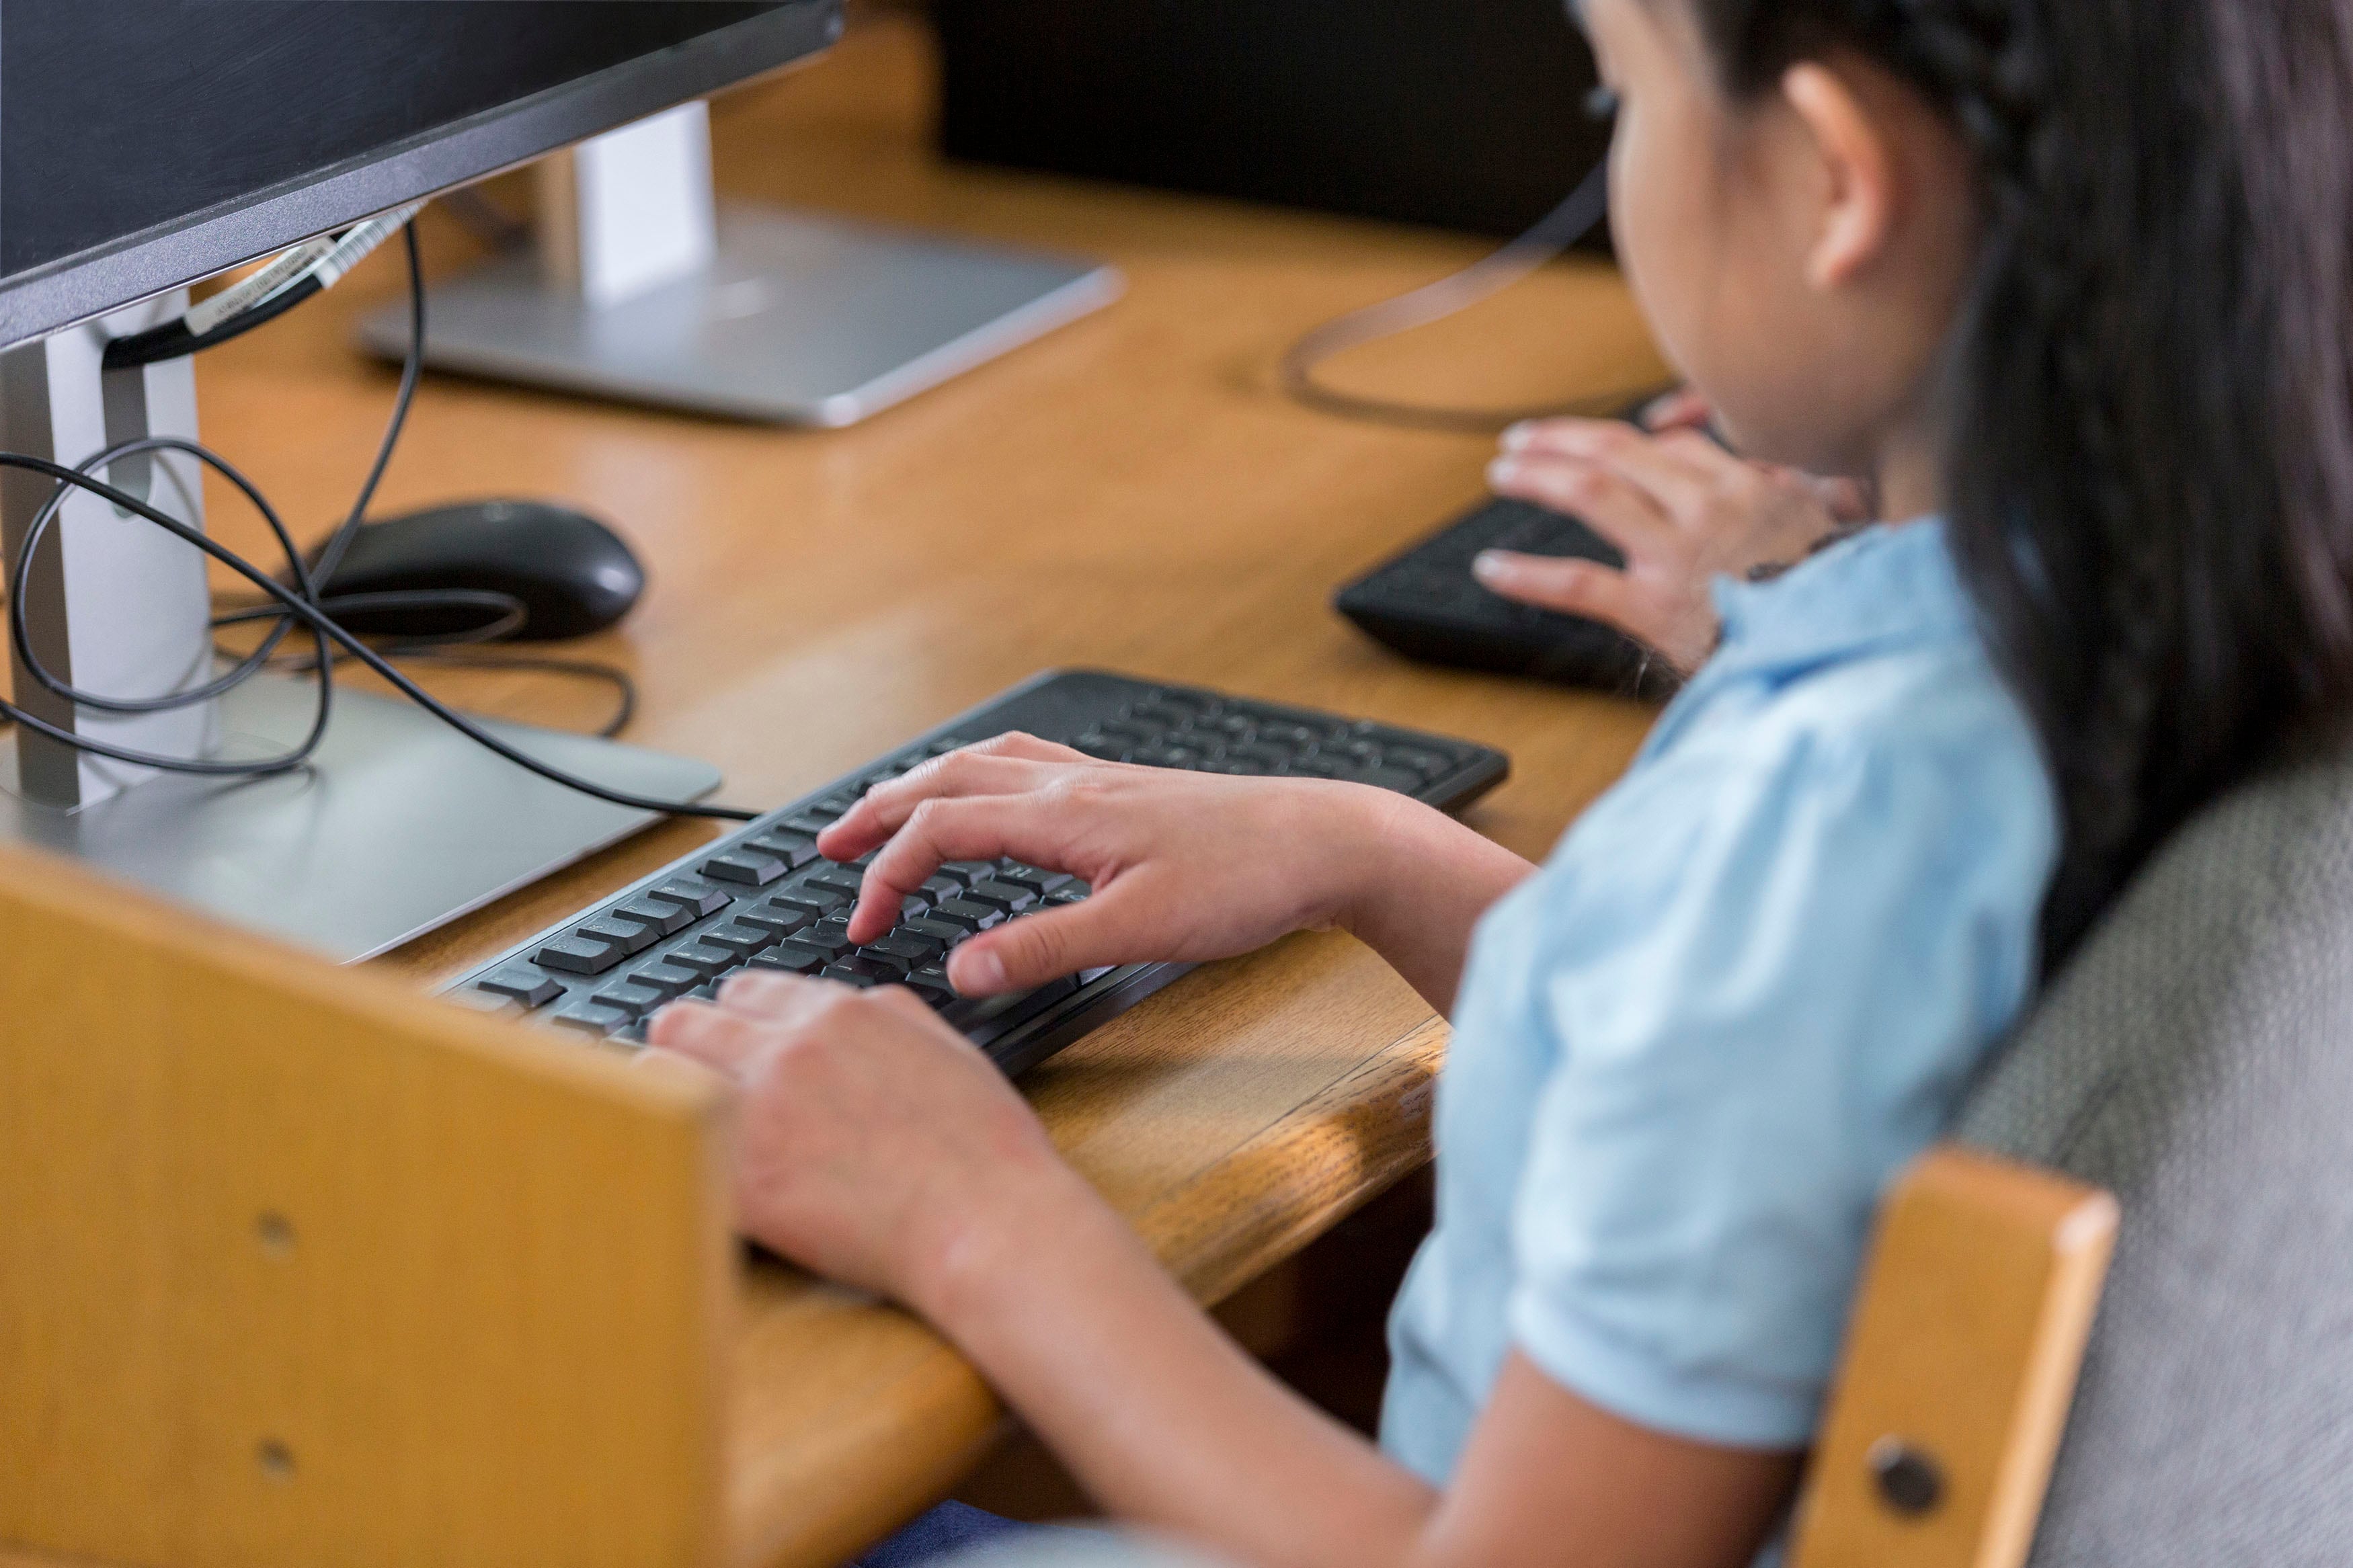 Elementary school girl in computer lab just her hands and side of face showing.